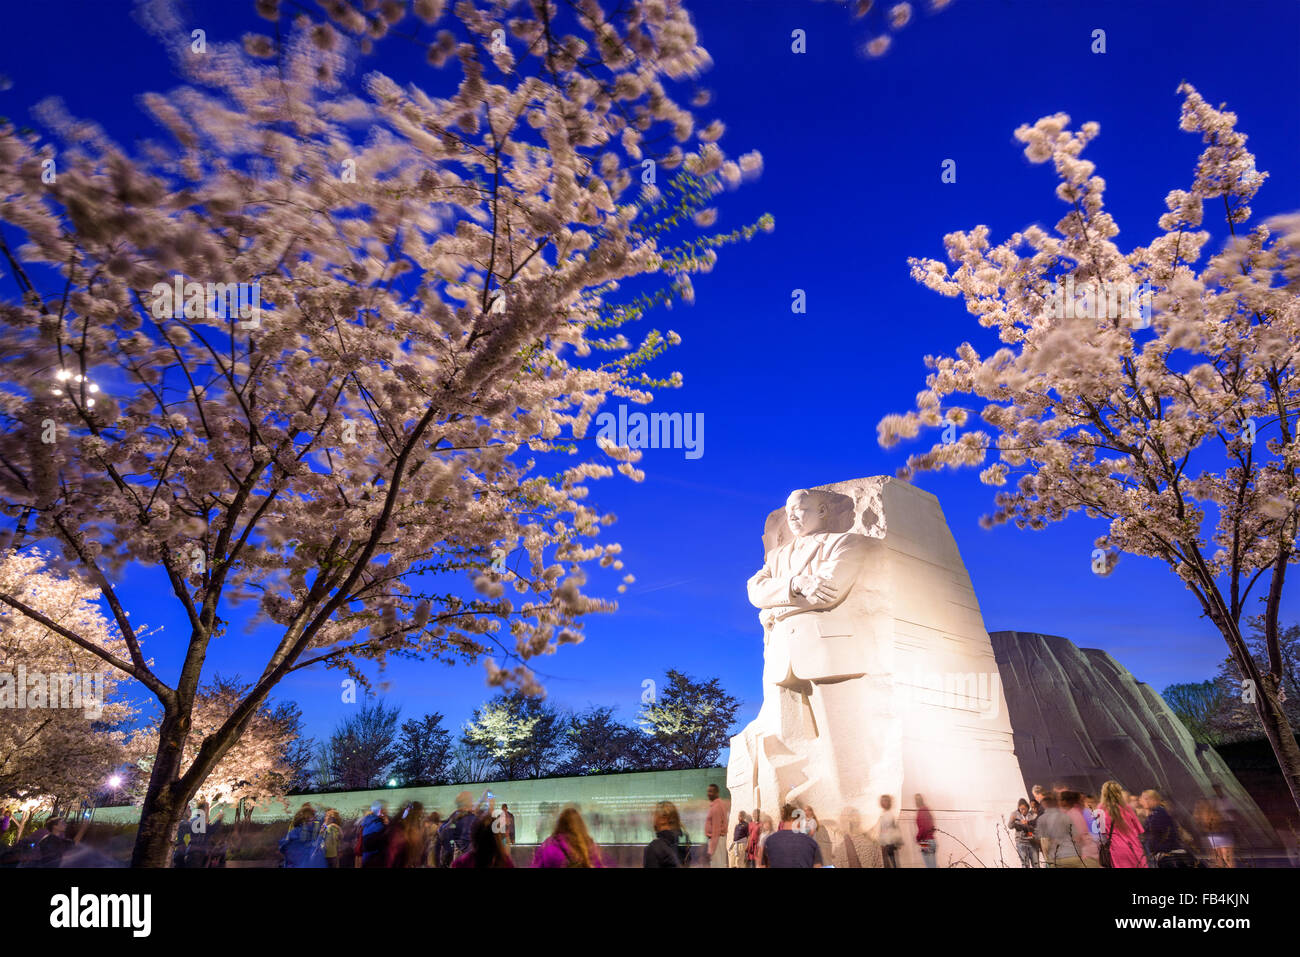 The memorial to the civil rights leader Martin Luther King, Jr. in Wasington DC, USA during the spring cherry blossom season. Stock Photo